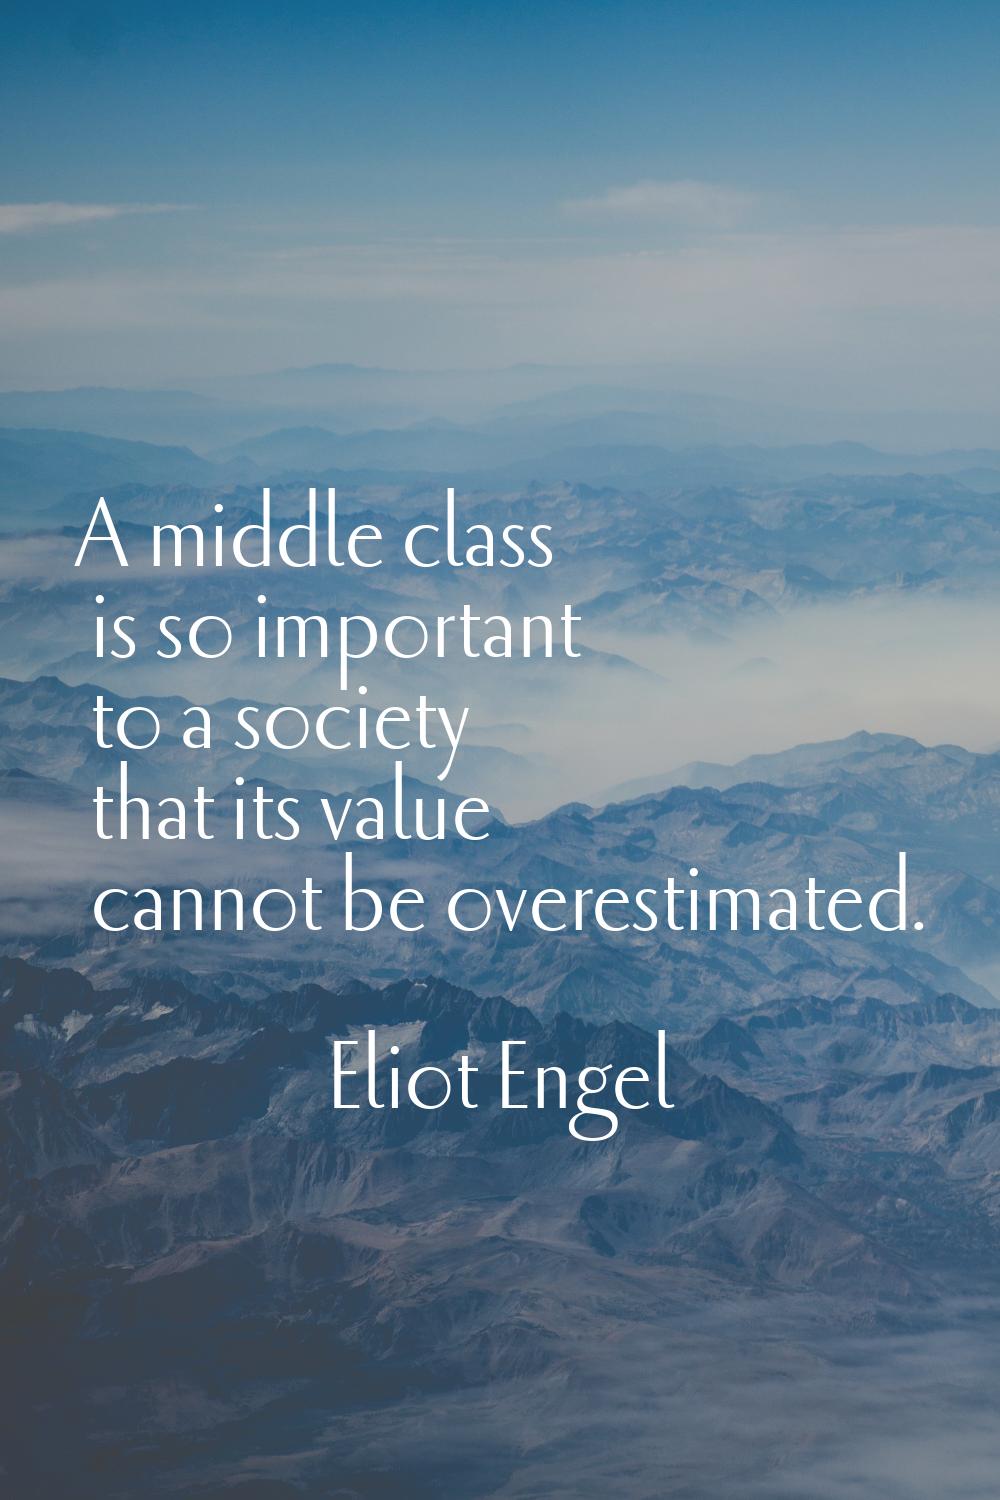 A middle class is so important to a society that its value cannot be overestimated.